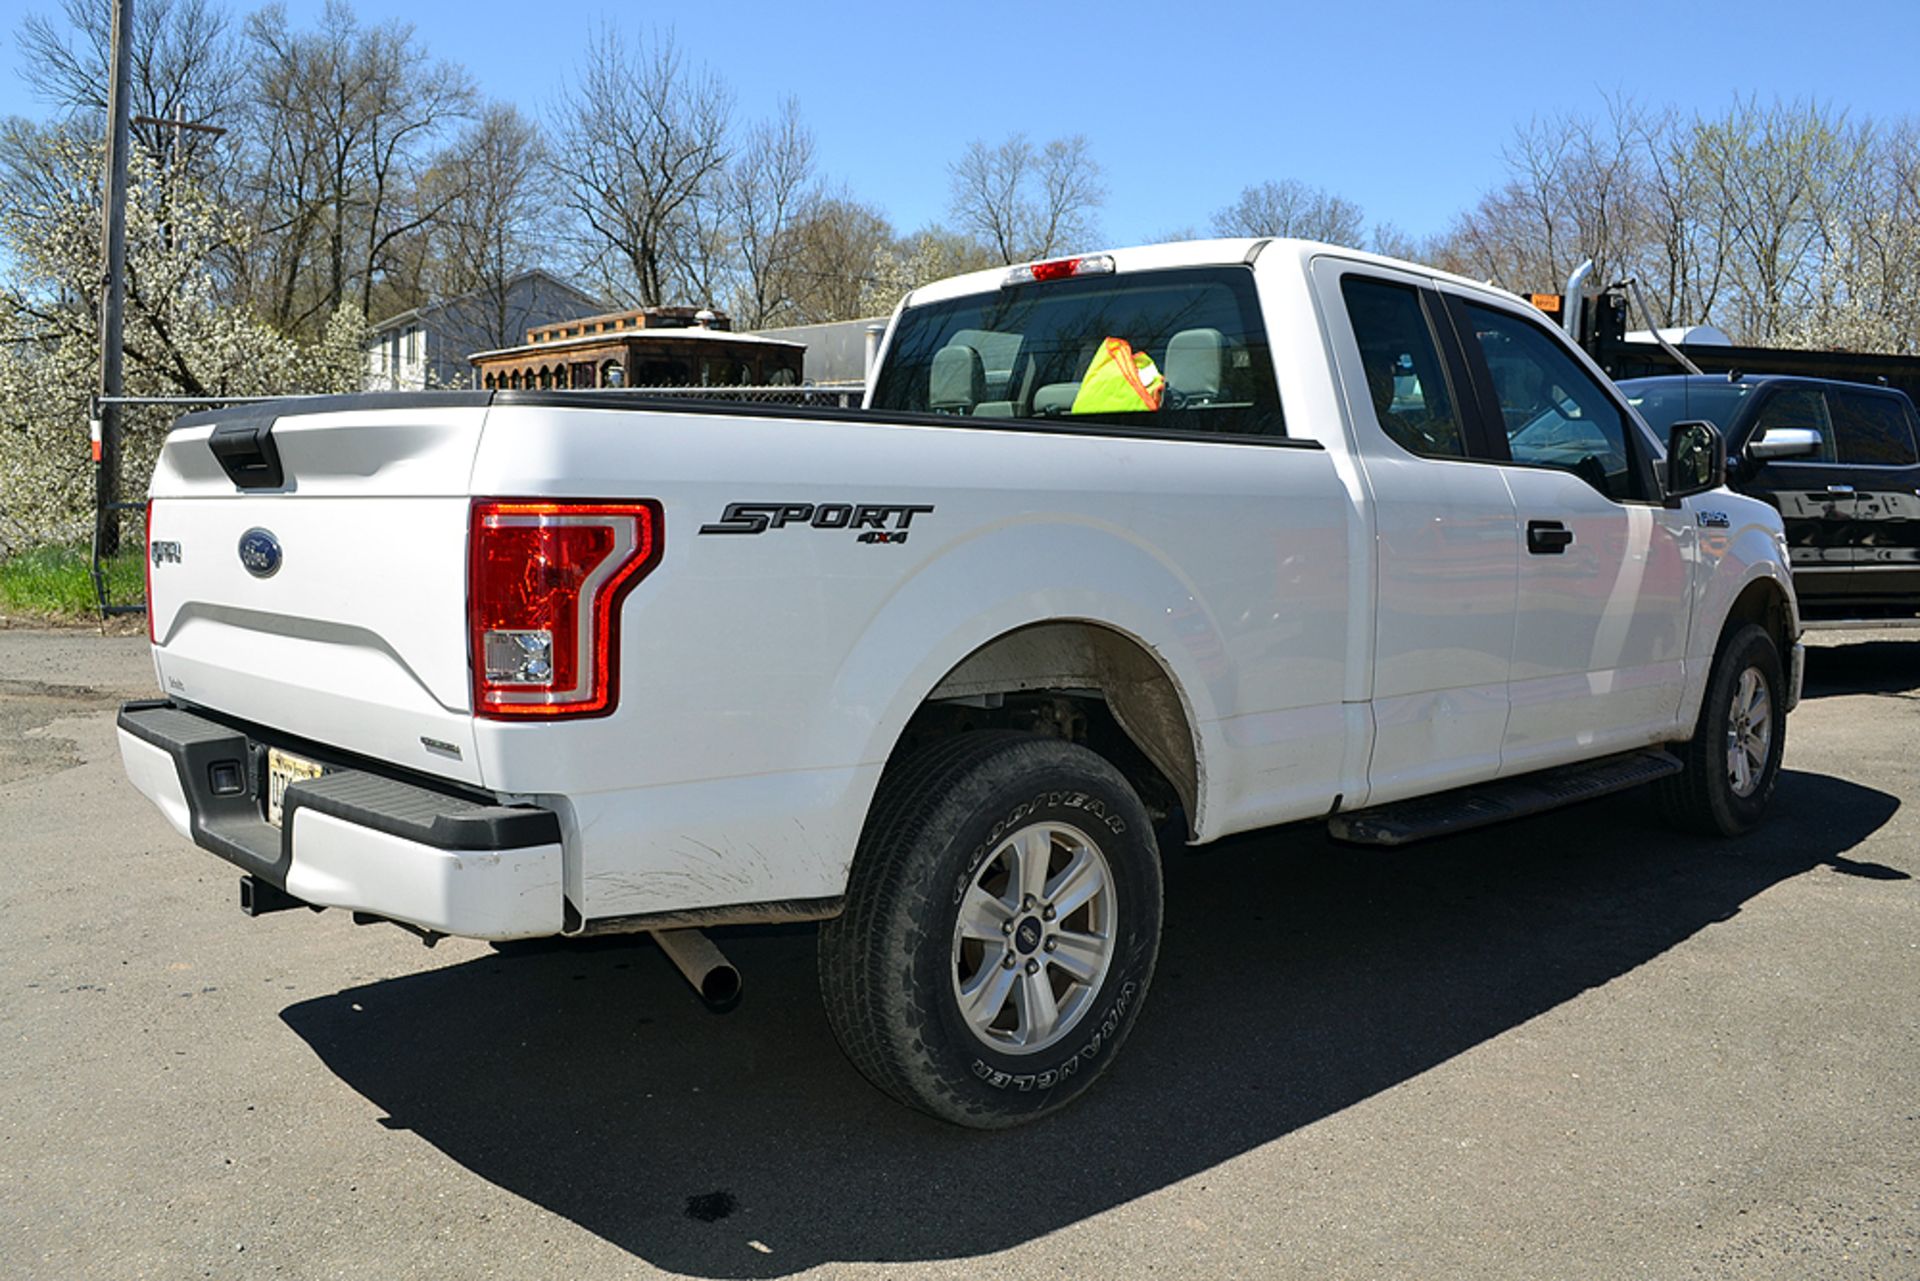 2015 Ford F150 Lariat SuperCab, 4WD Pick Up Truck - Image 3 of 11